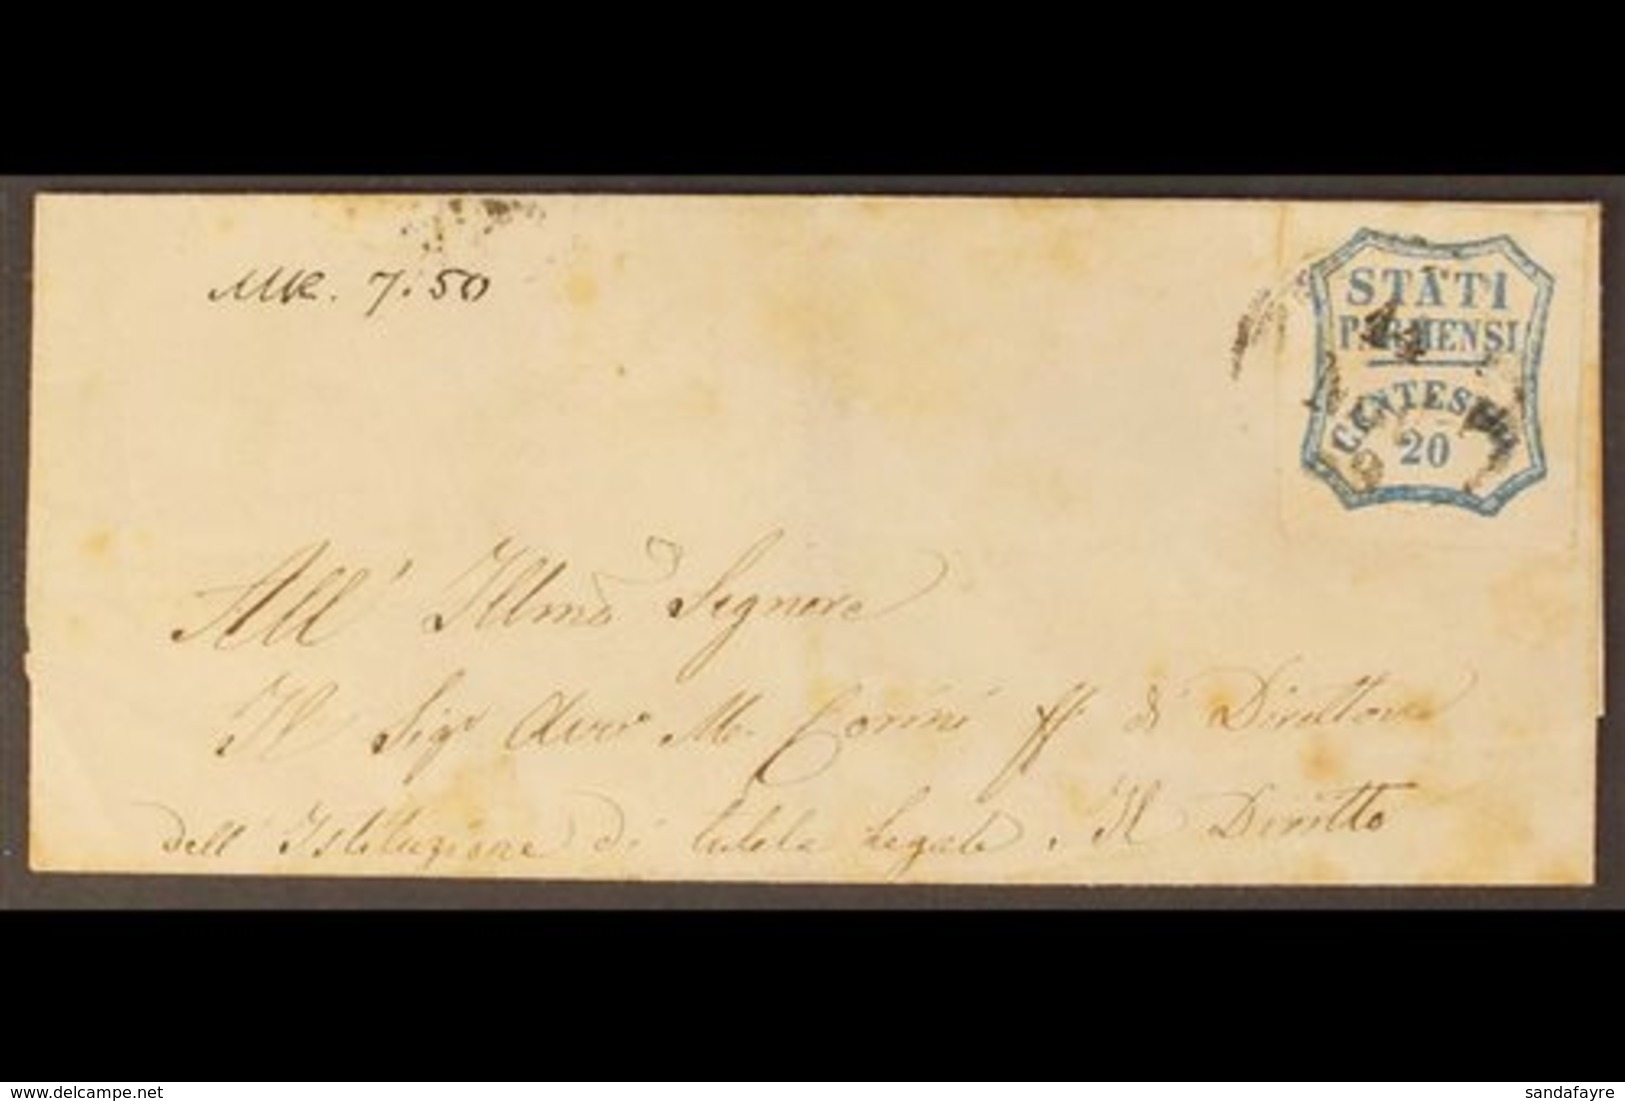 PARMA 1859 Wrapper To Genova Franked 20c Blue Provisional, Sass15, Tied By Parma 11 Nov 59 Cds. Some Peripheral Toning B - Non Classés